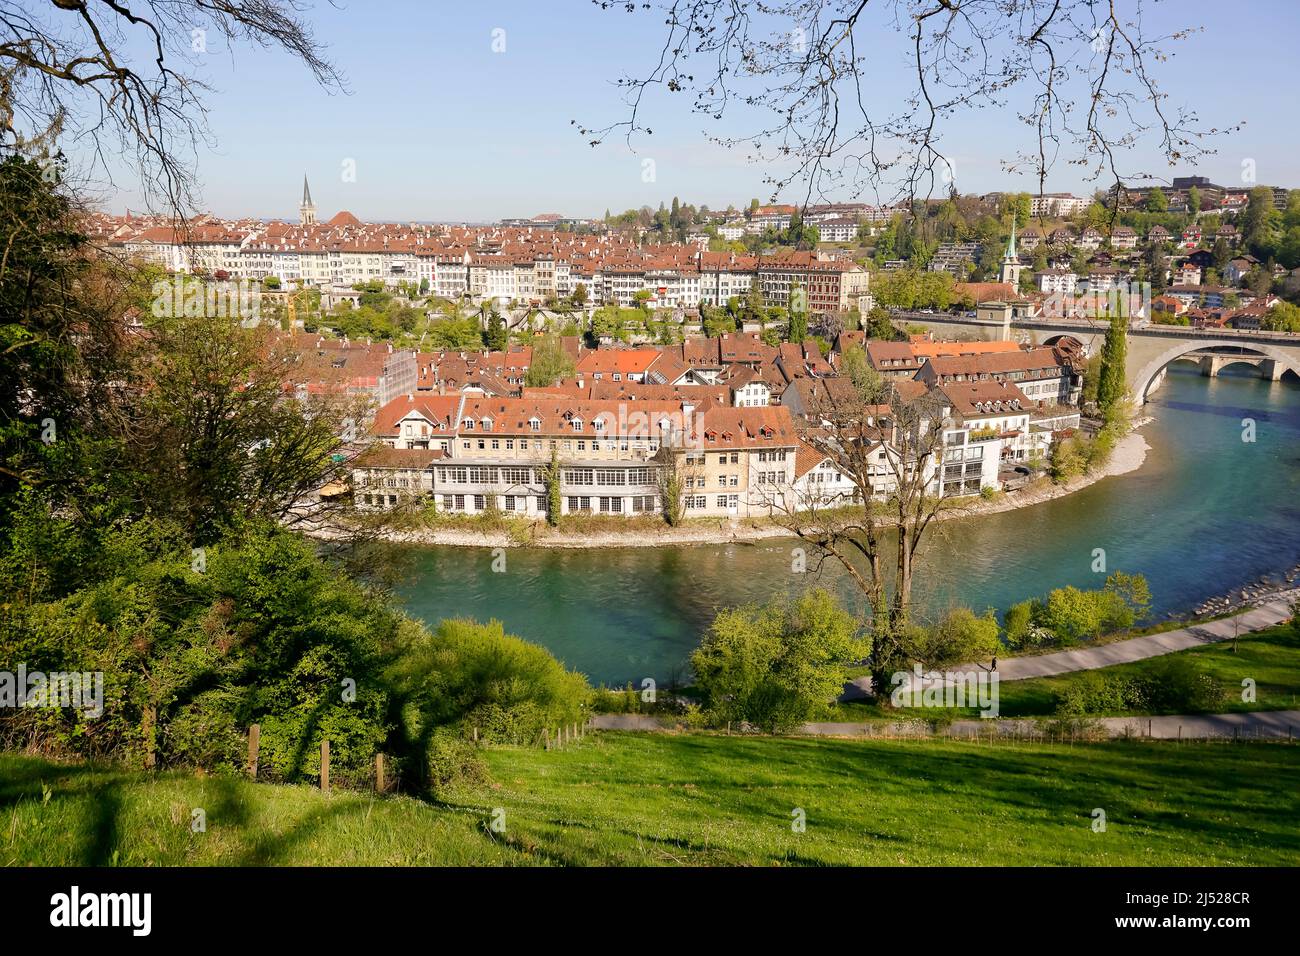 Bern, Switzerland - April 21, 2017: The buildings of the Old Town are visible in the distance behind the Aare river. There is a dense old town develop Stock Photo